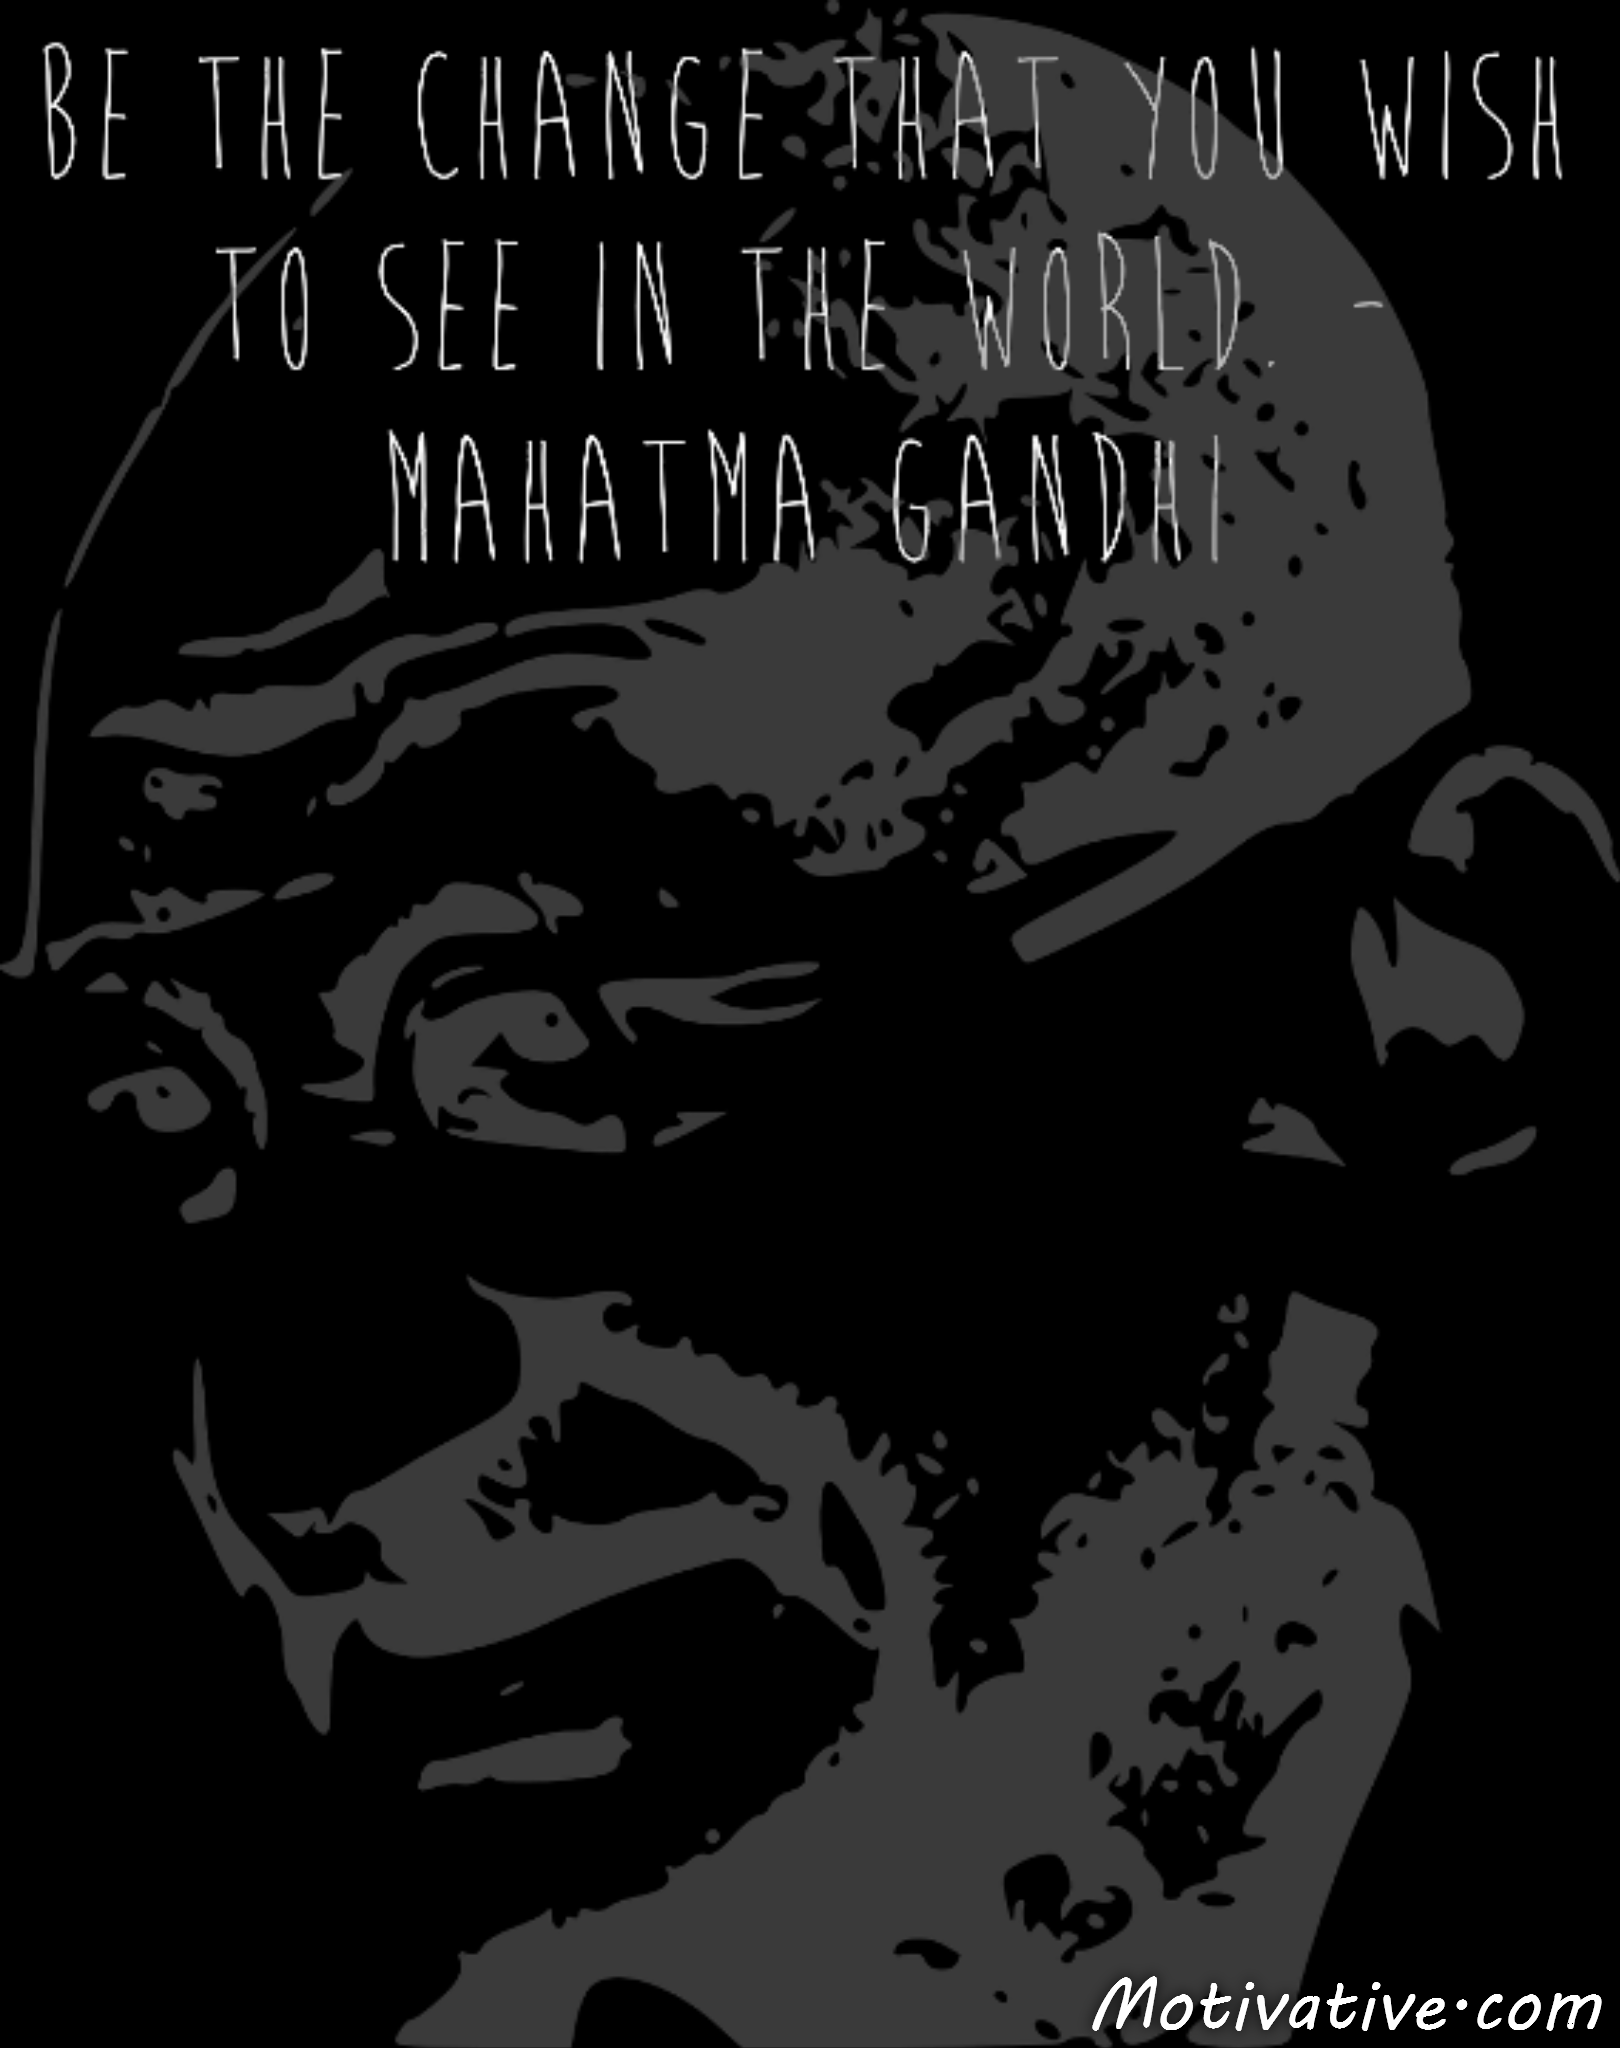 Be the change that you wish to see in the world. – Mahatma Gandhi